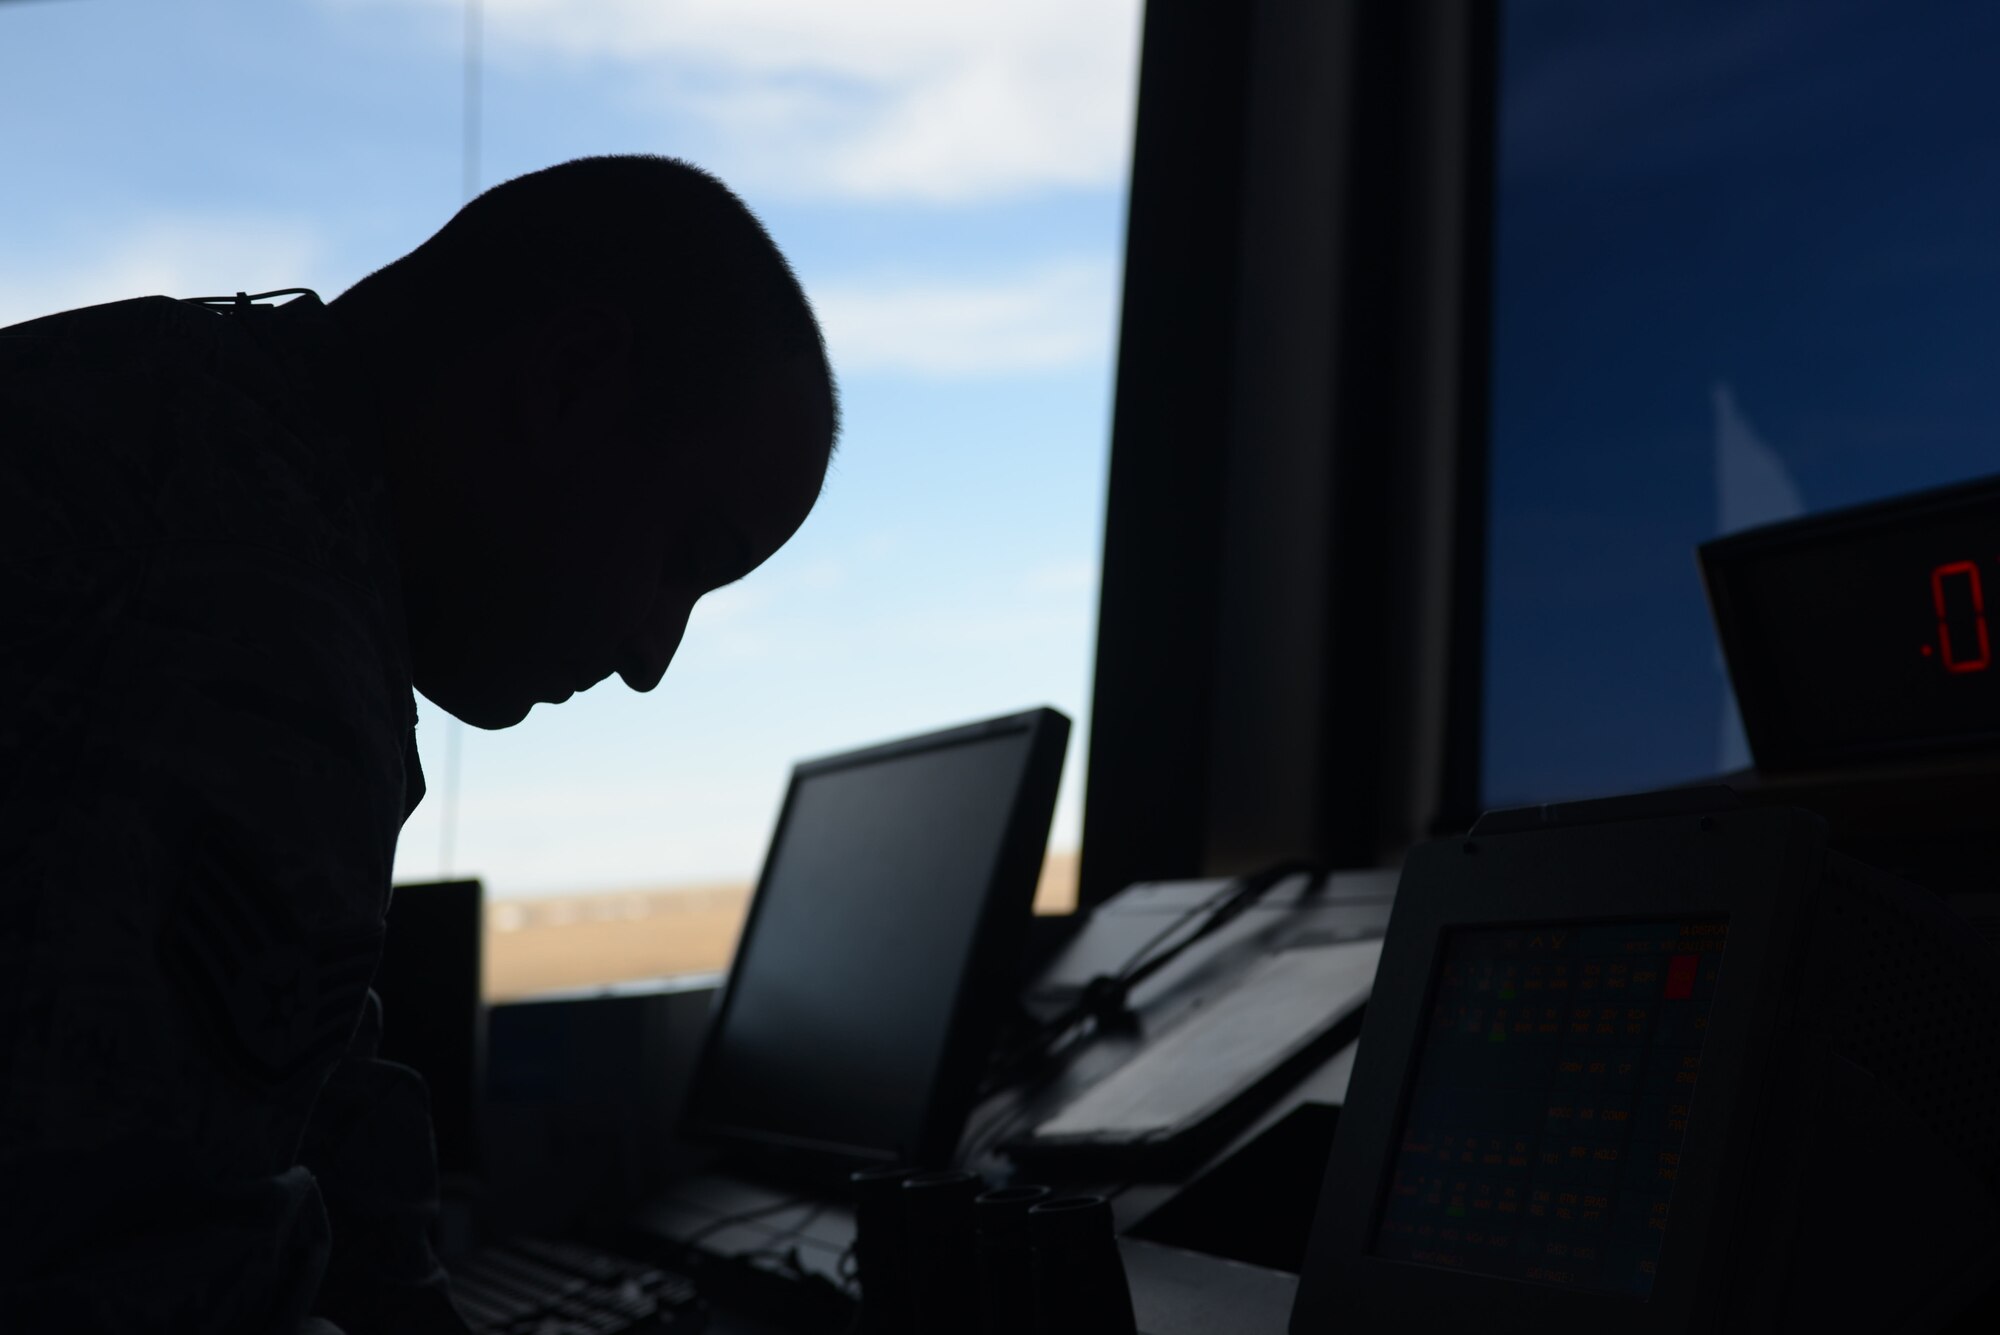 Staff Sgt. Yoendri Reinosa, an air traffic controller assigned to the 28th Operations Support Squadron, ensures an aircraft takes off safely at Ellsworth Air Force Base, S.D., Nov. 16, 2016. The job can be a challenge because controllers work with such a limited airspace, standing at five miles in radius surface up to 5,000 feet main sea level. (U.S. Air Force photo by Airman 1st Class Donald C. Knechtel)